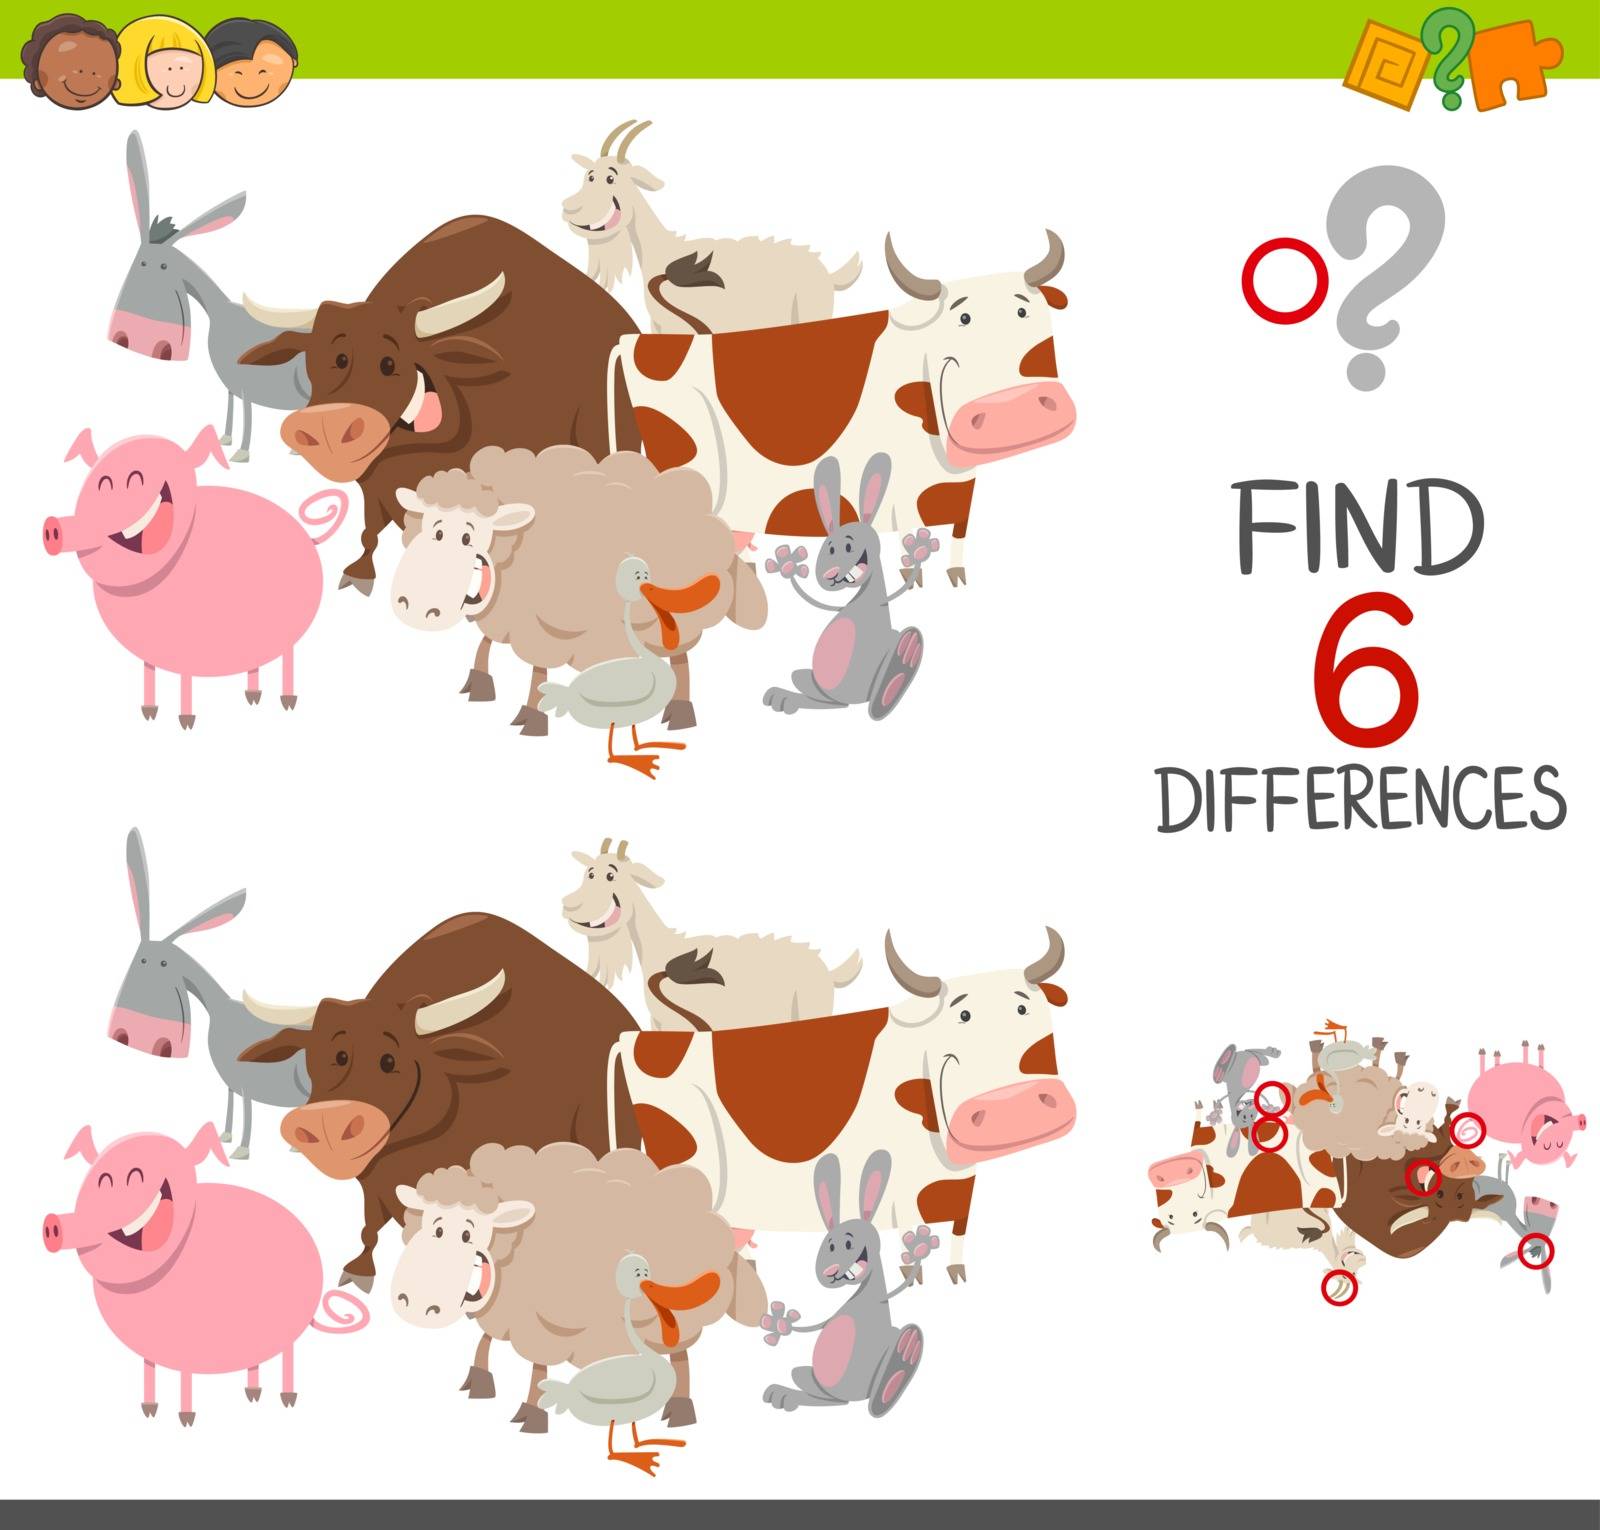 educational finding differences game by izakowski